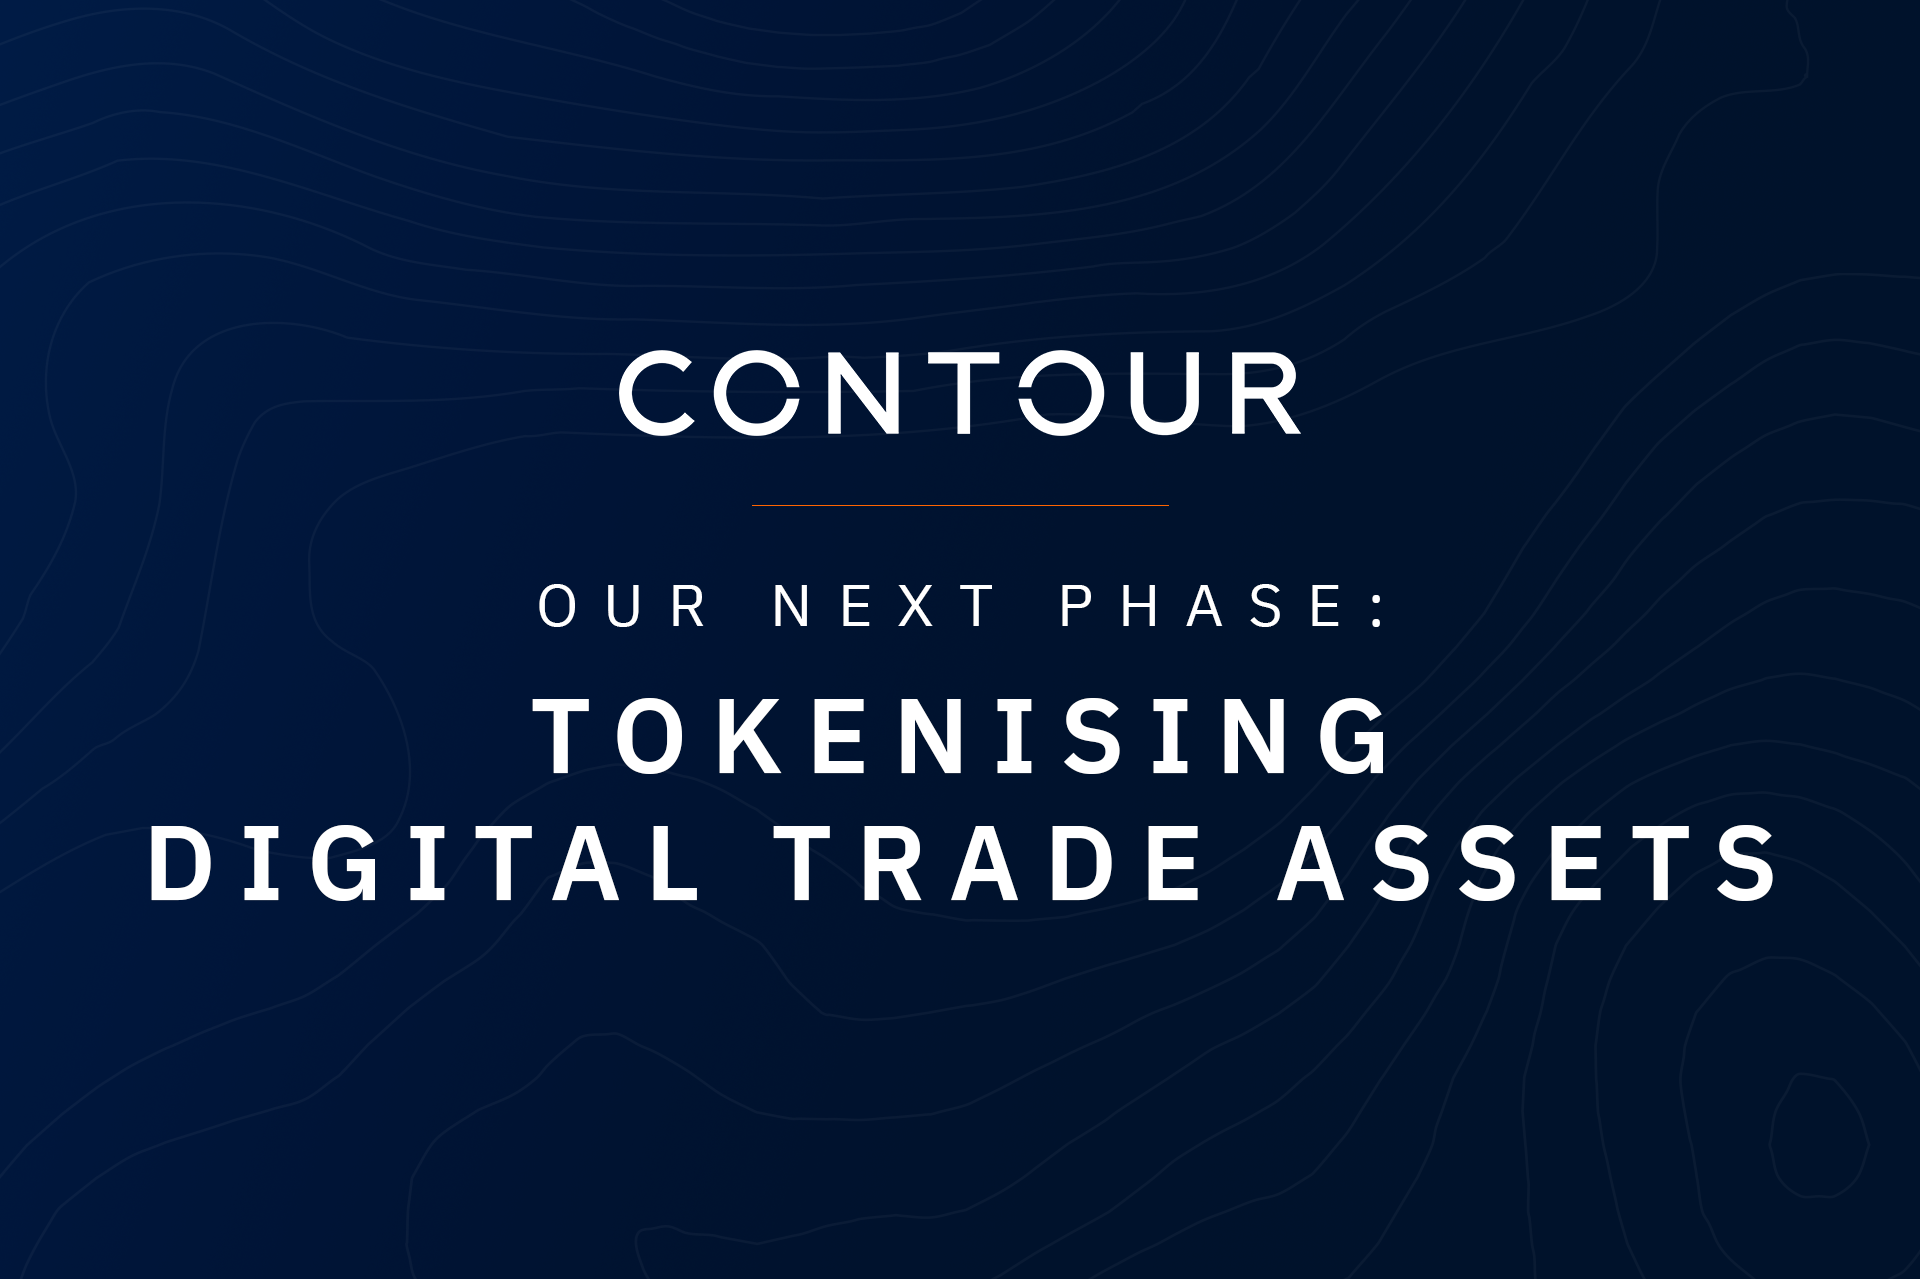 Contour’s Next Phase: Tokenising digital trade assets 